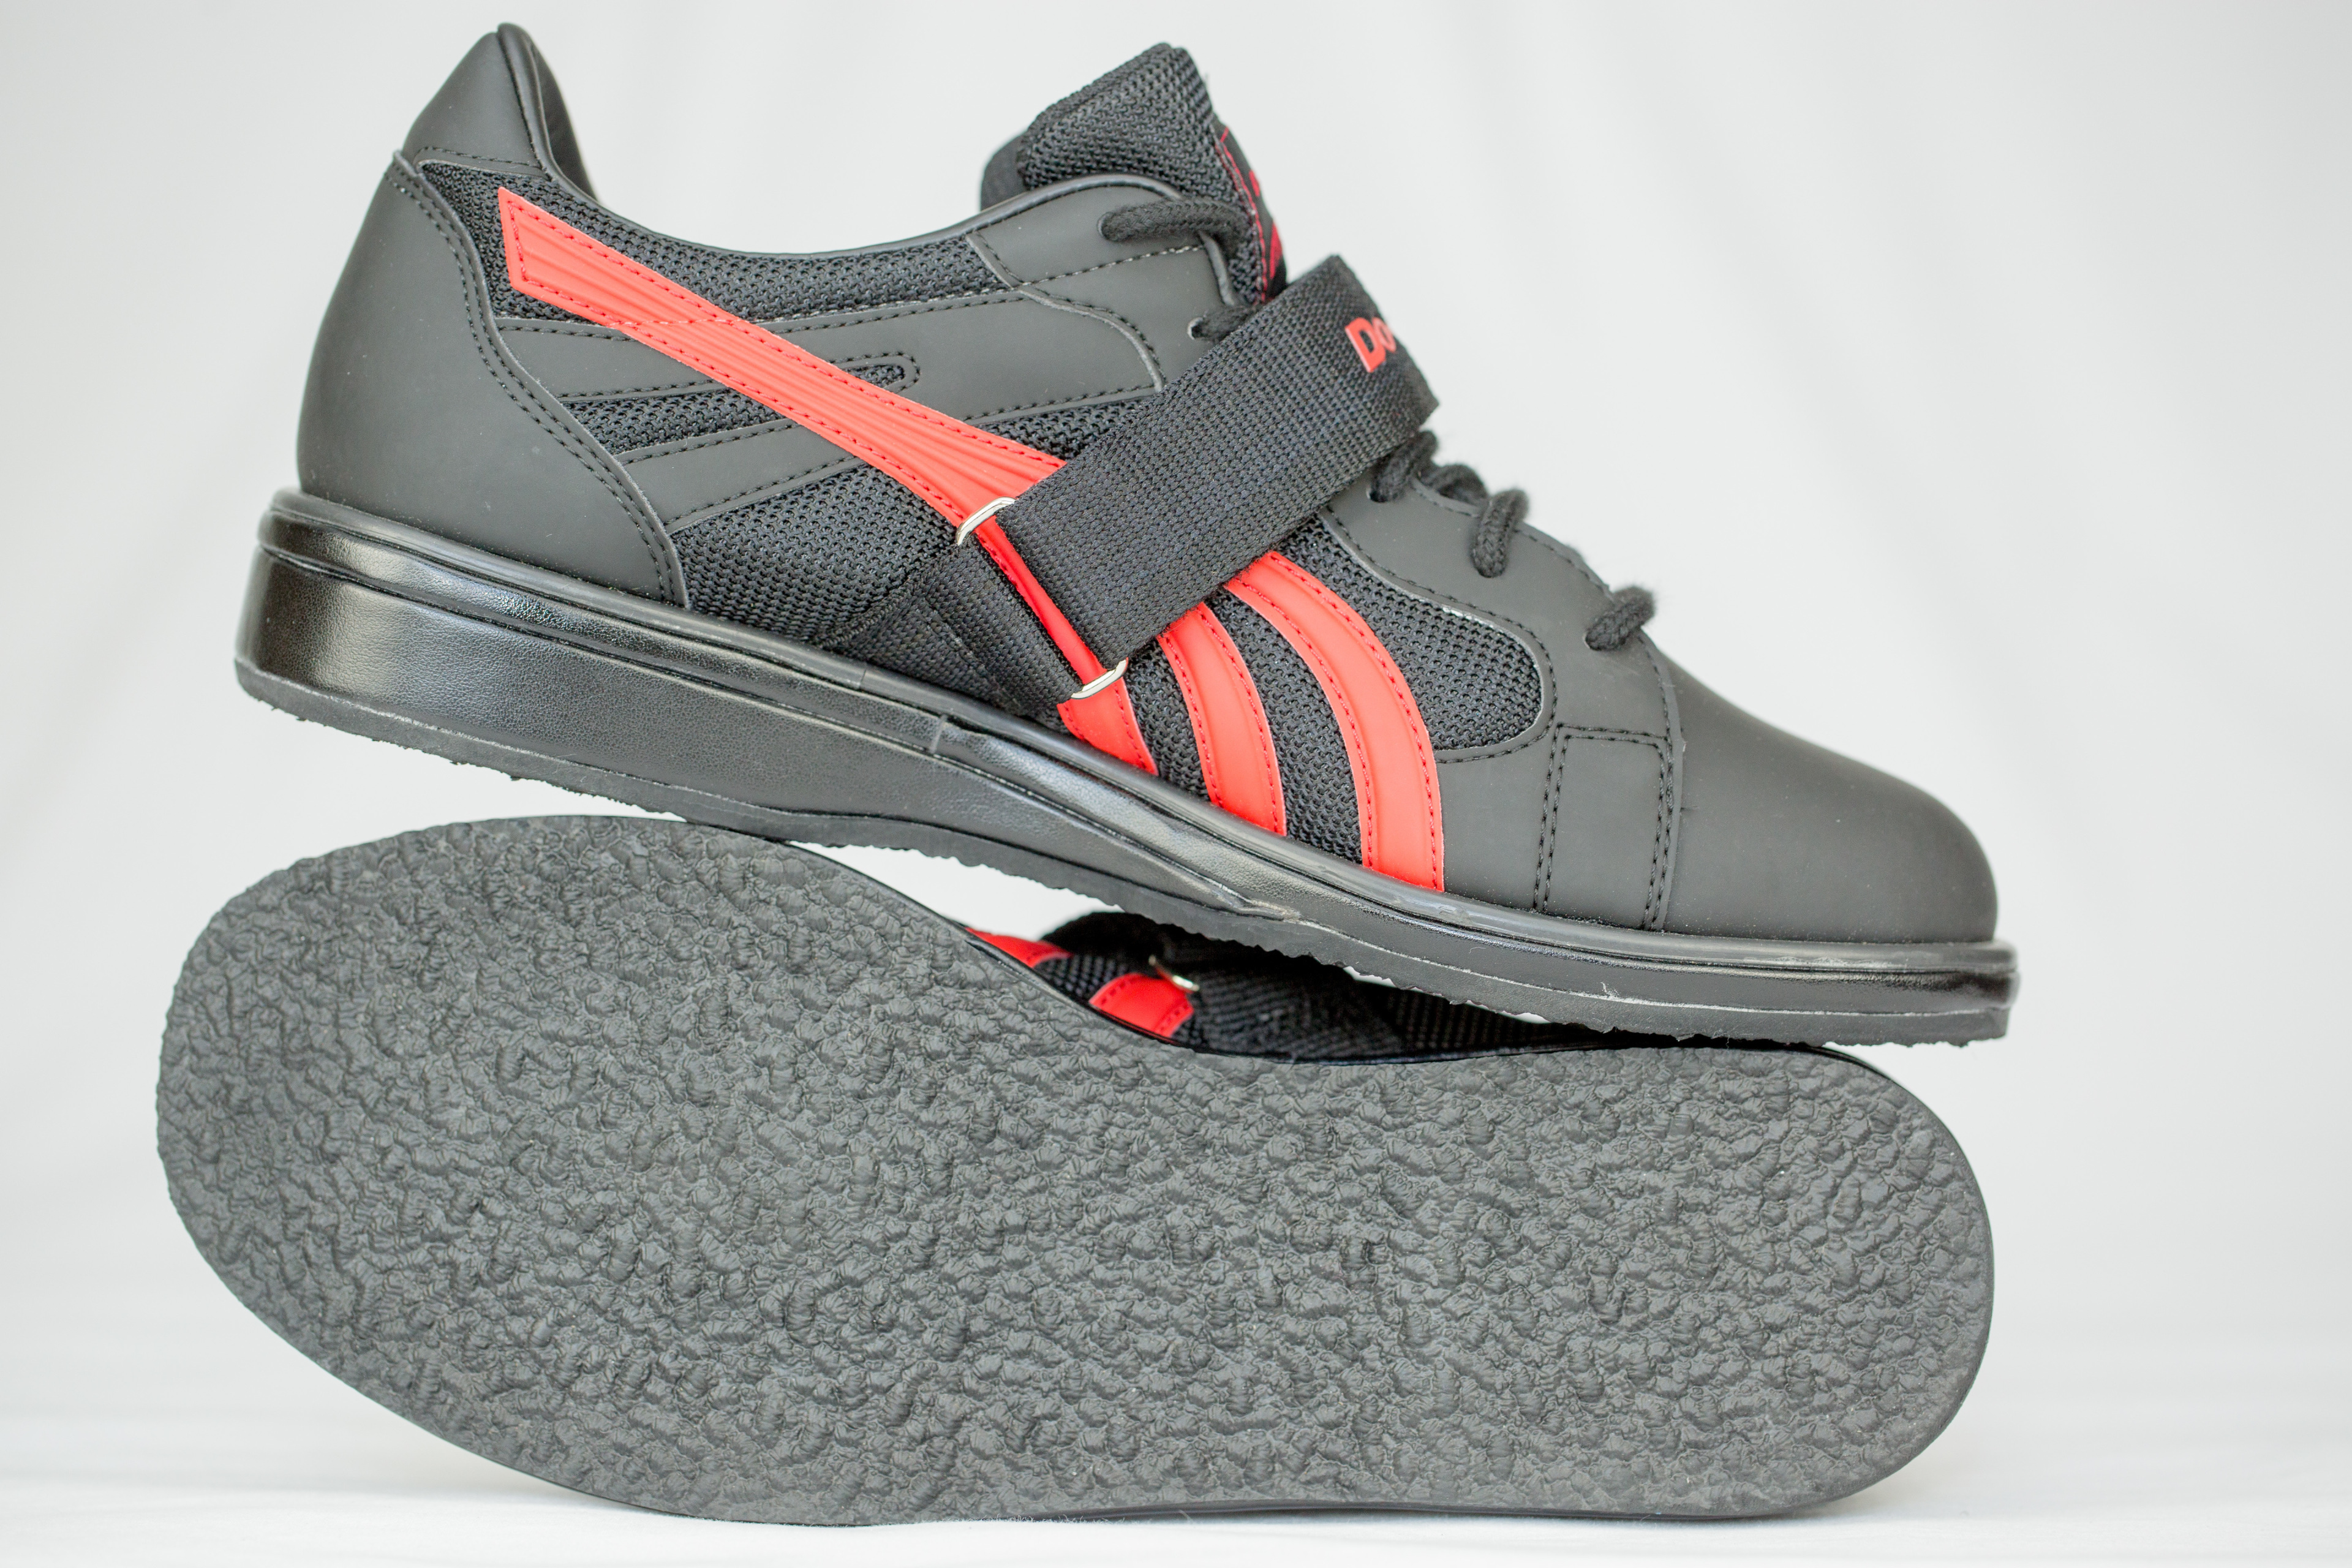 Do Win LIMITED EDITION dark grey/red weightlifting shoe